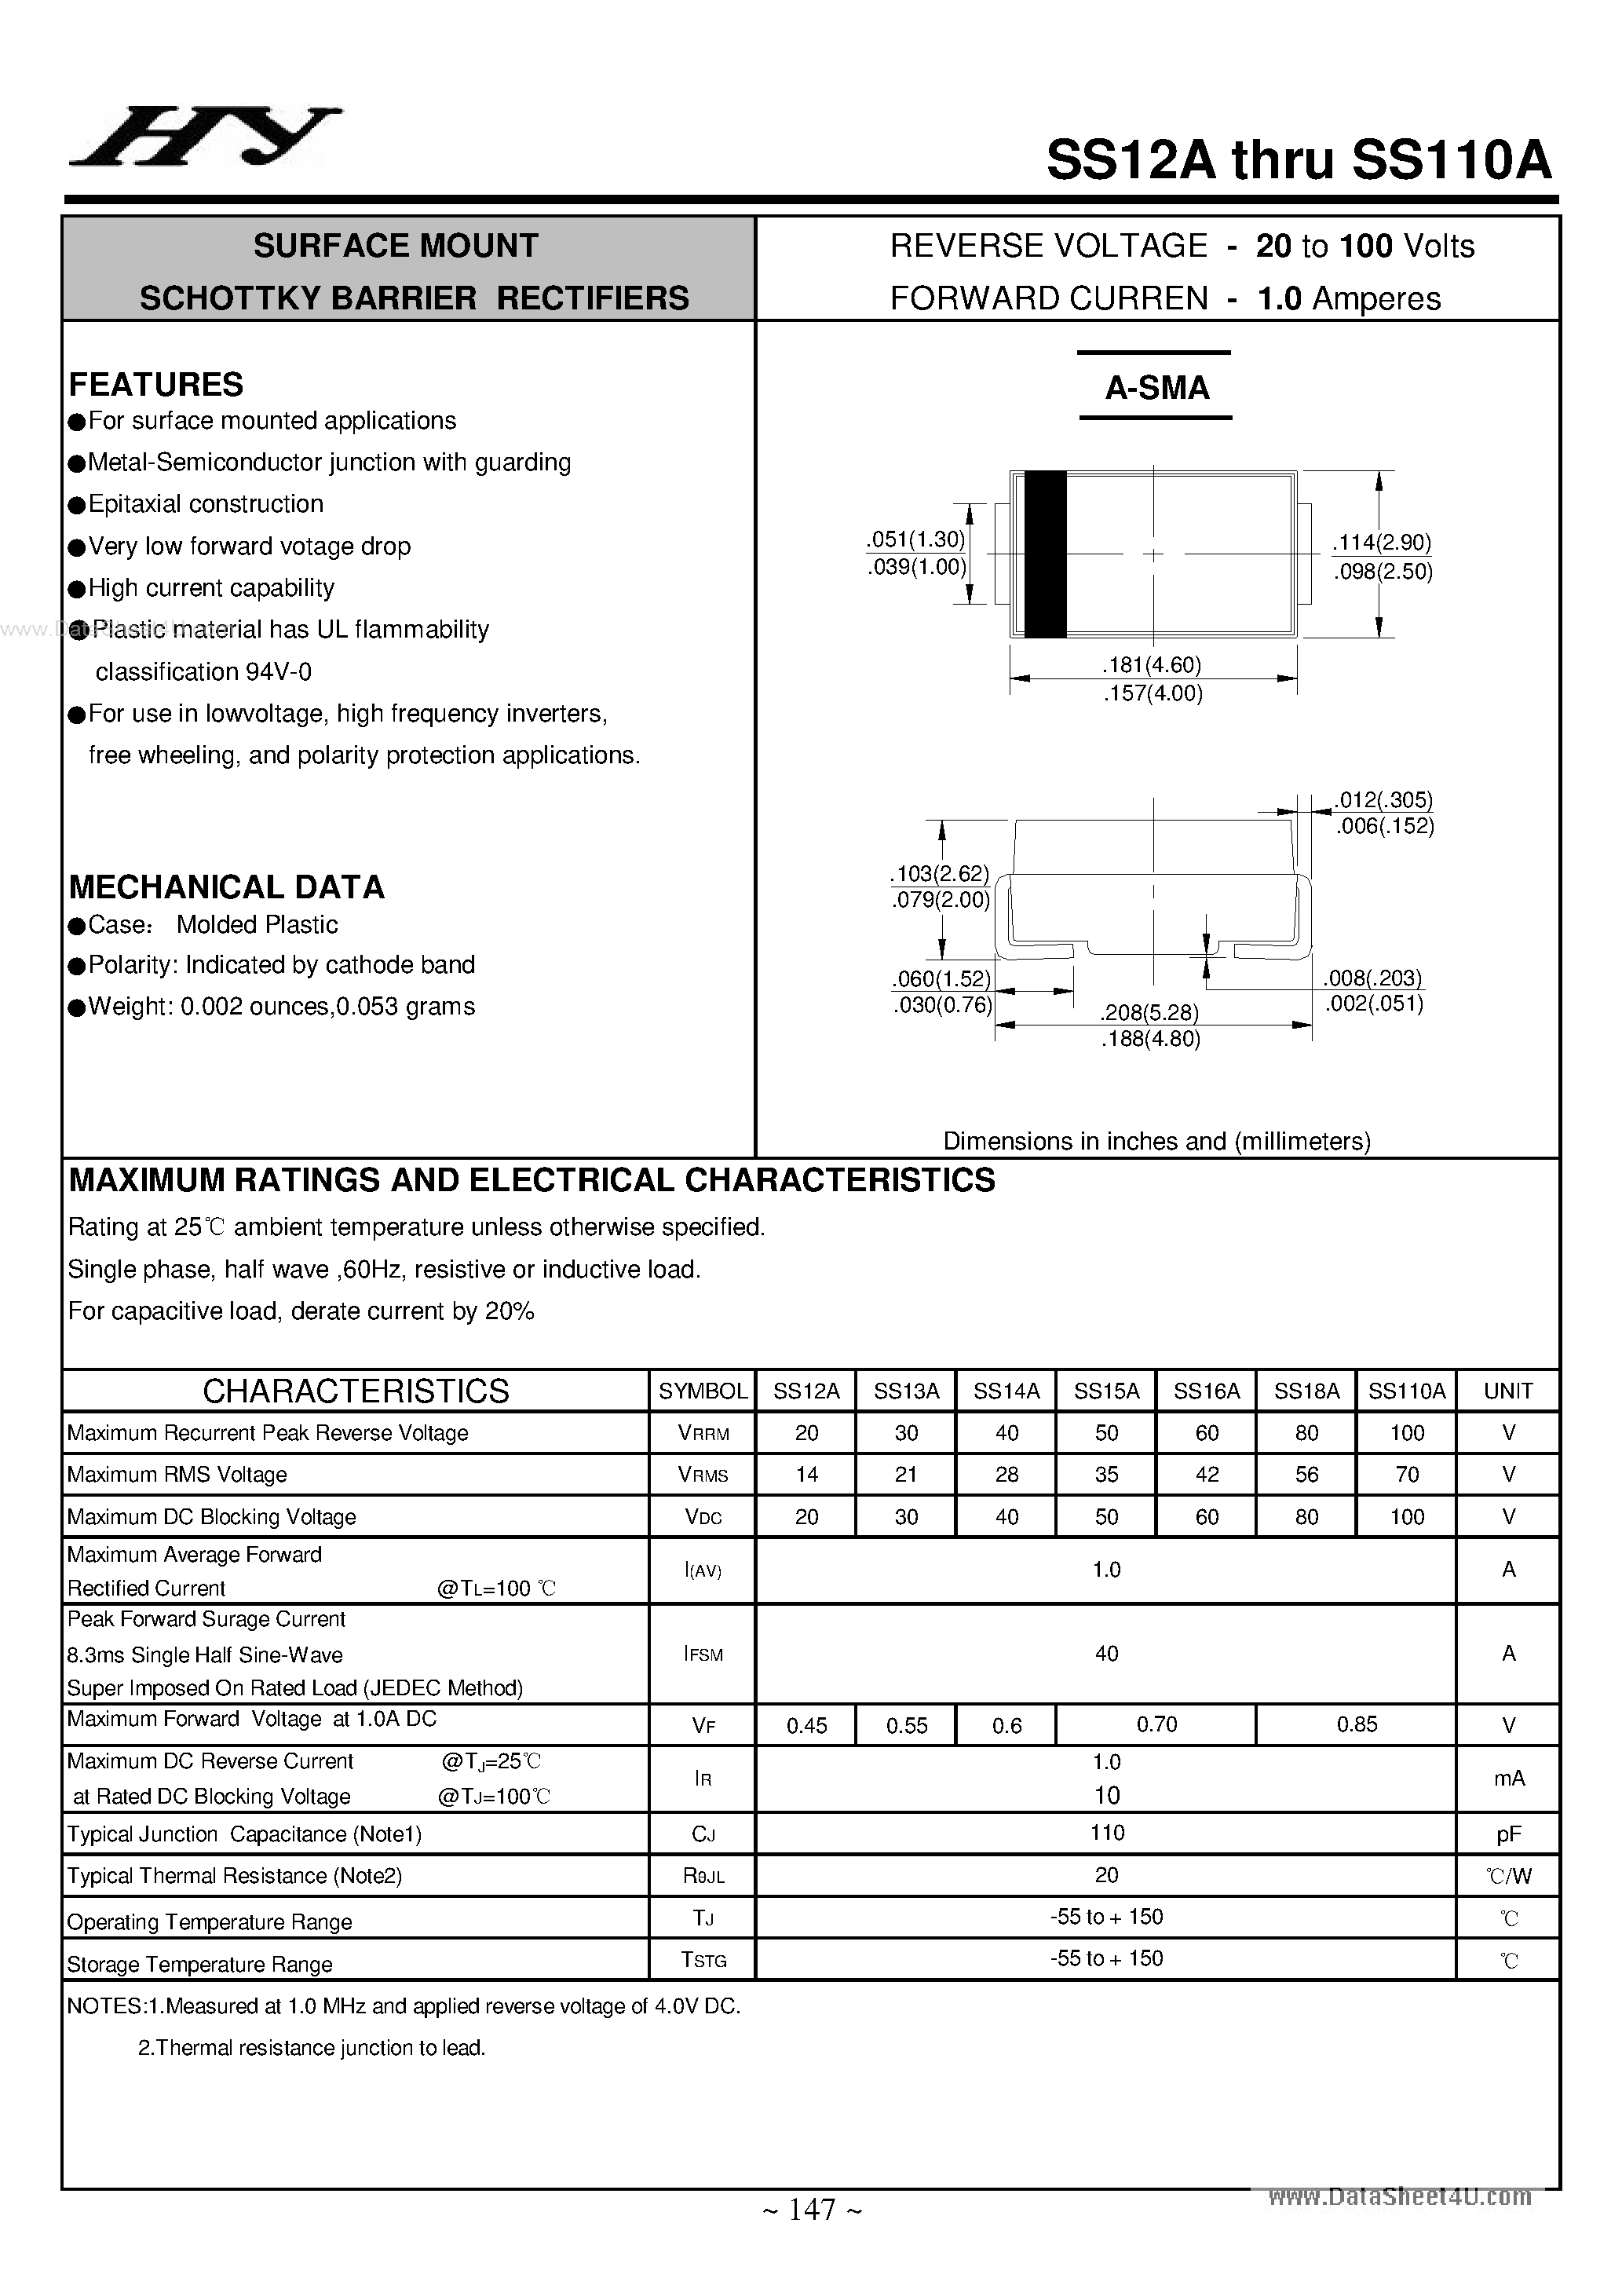 Datasheet SS110A - (SS12A - SS110A) RATING AND CHARACTERTIC CURVES page 1